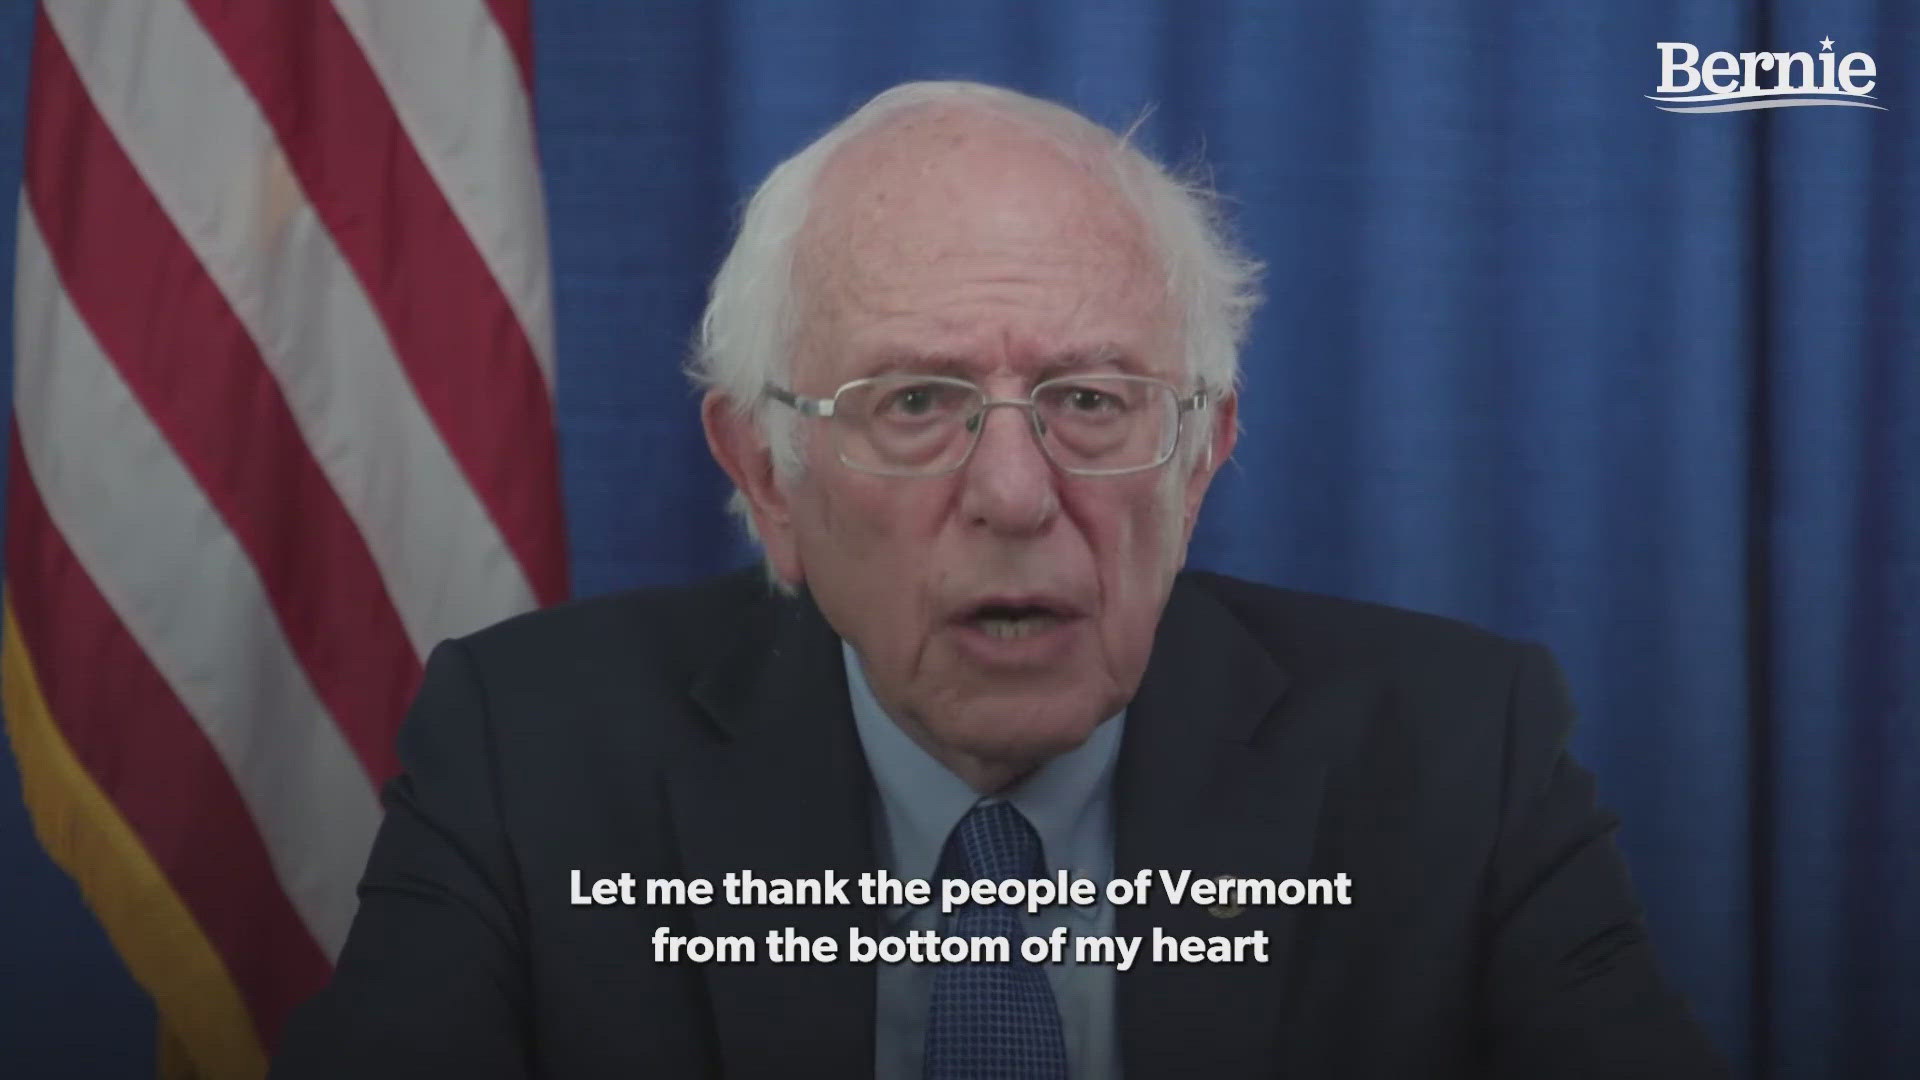 The independent senator from Vermont is 82 years old and ended retirement rumors with the video announcement.